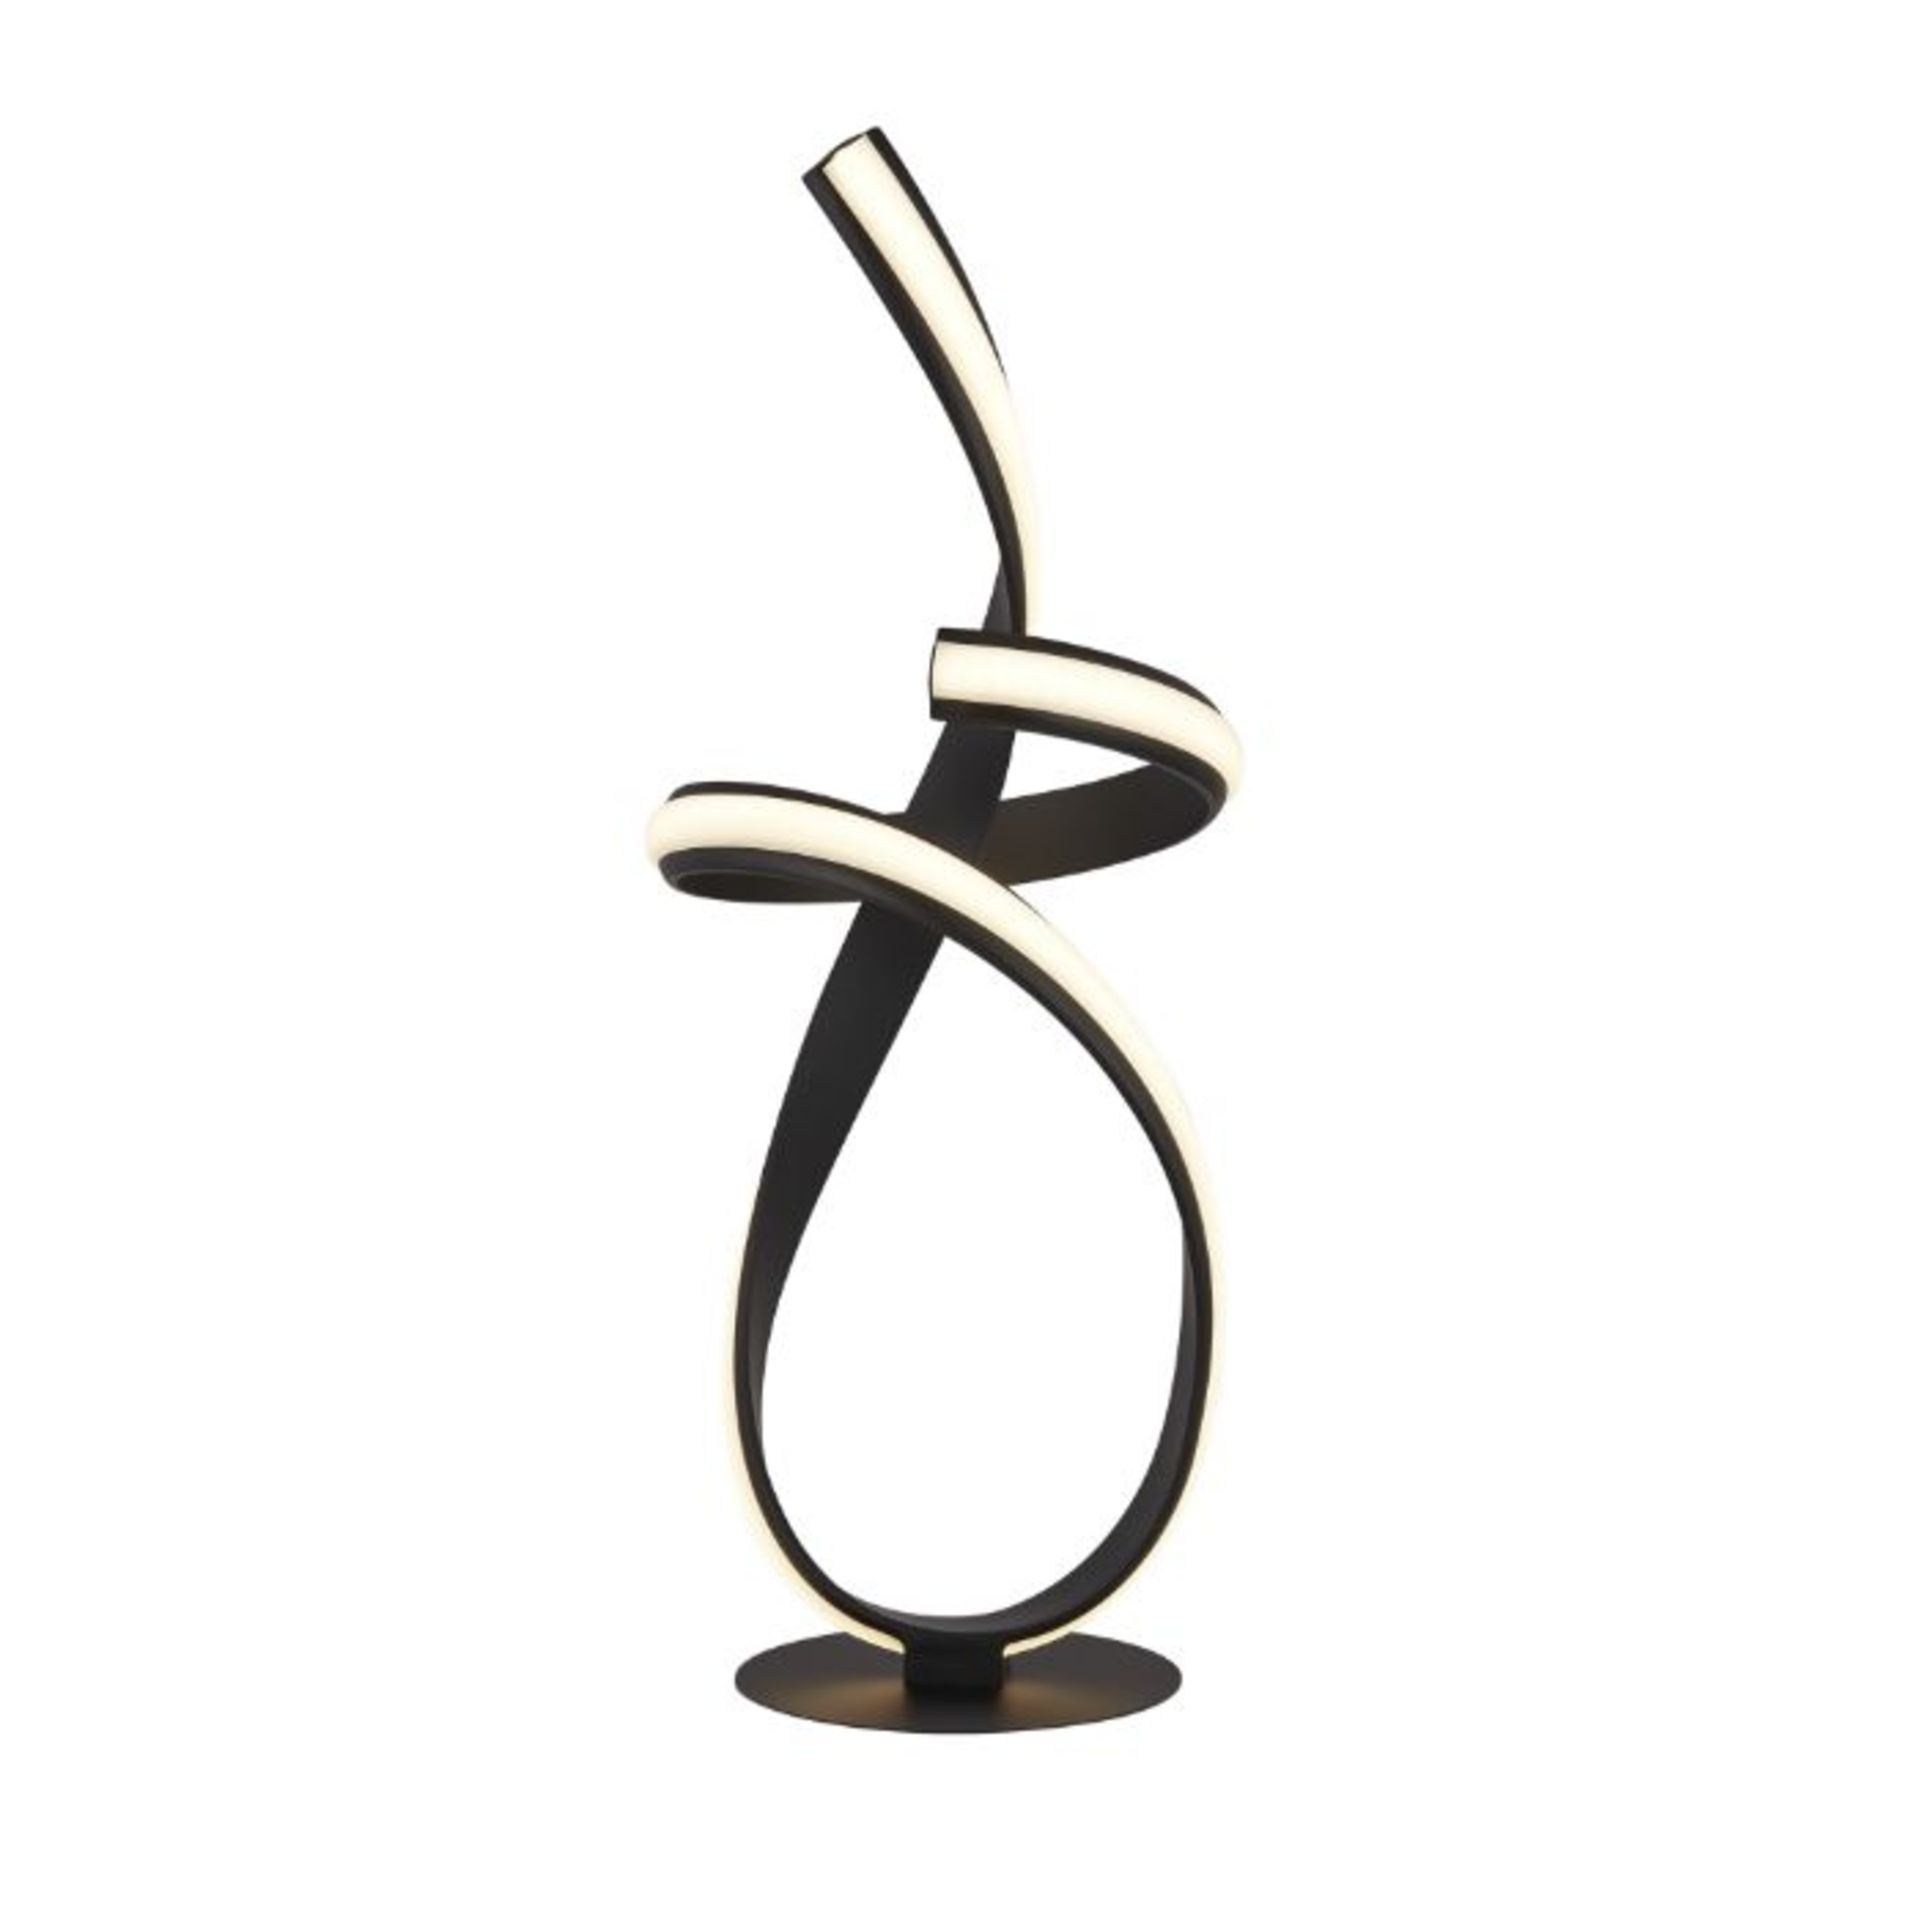 BRAND NEW BLACK RIBBON LED TABLE LAMP, 64CM HIGH, 17W - Contemporary table lamp in eye-catching ribb